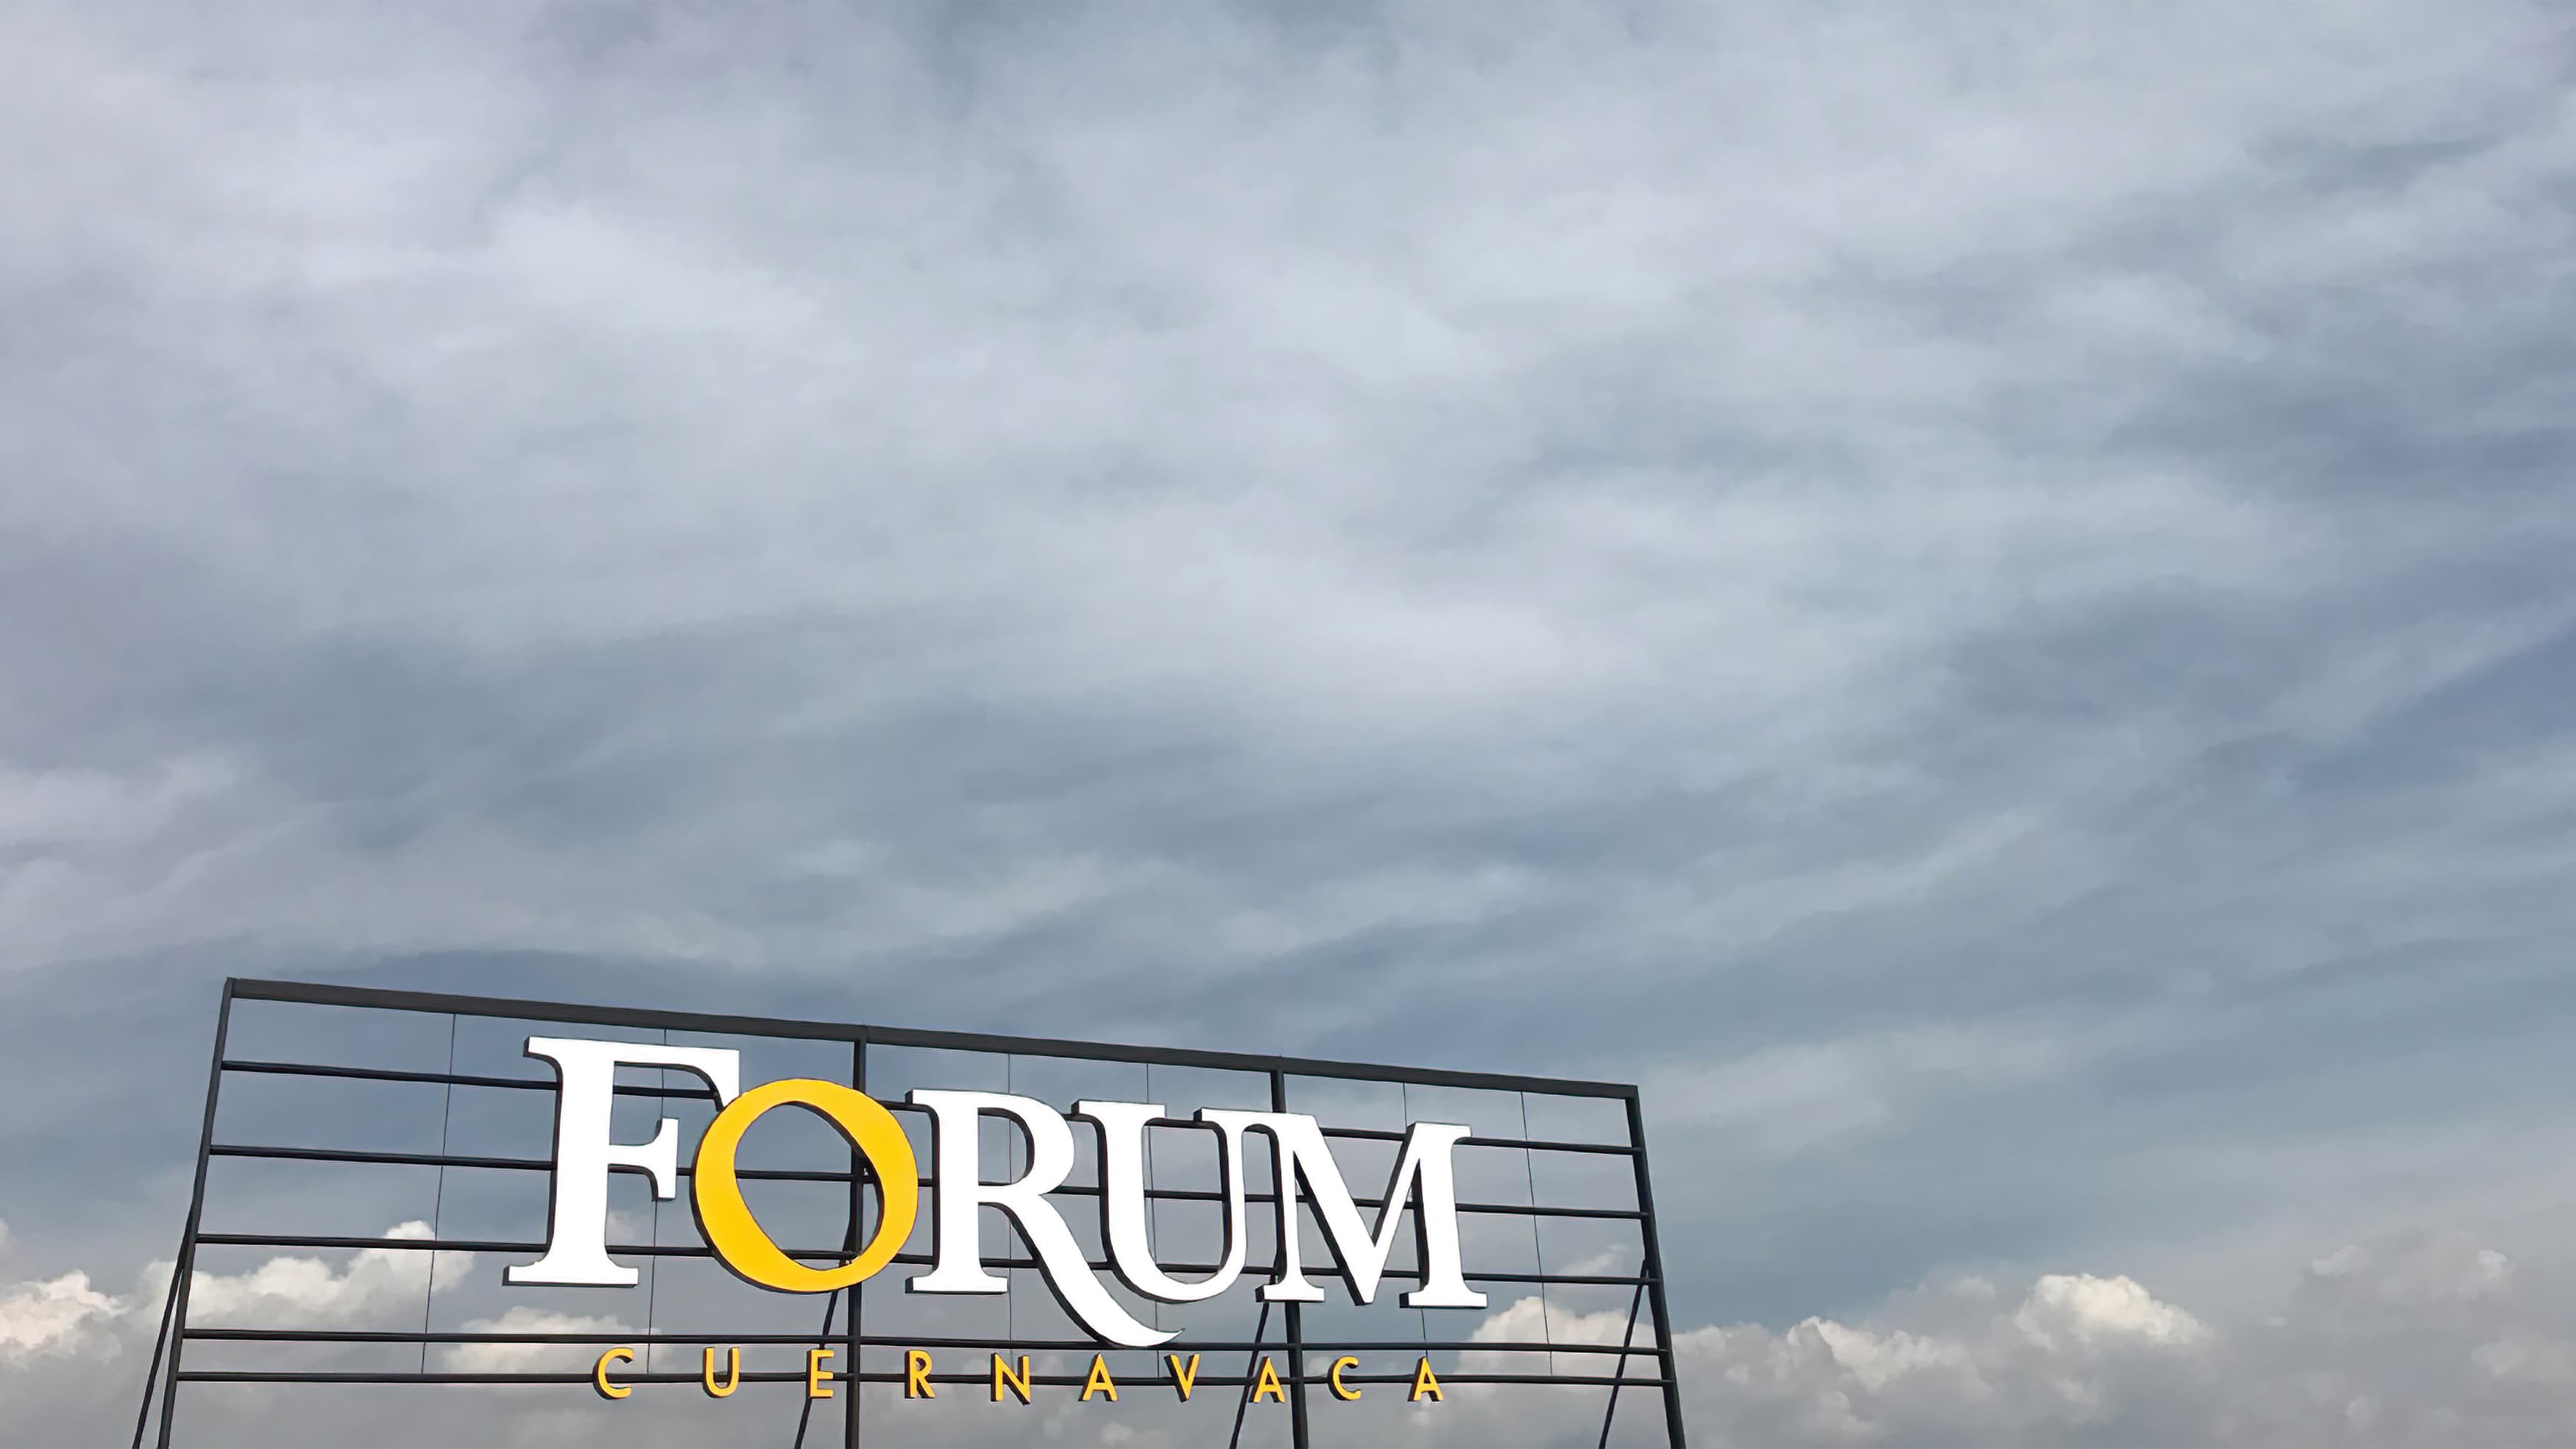 A photograph of a rooftop identity sign designed for Forum Curenavaca